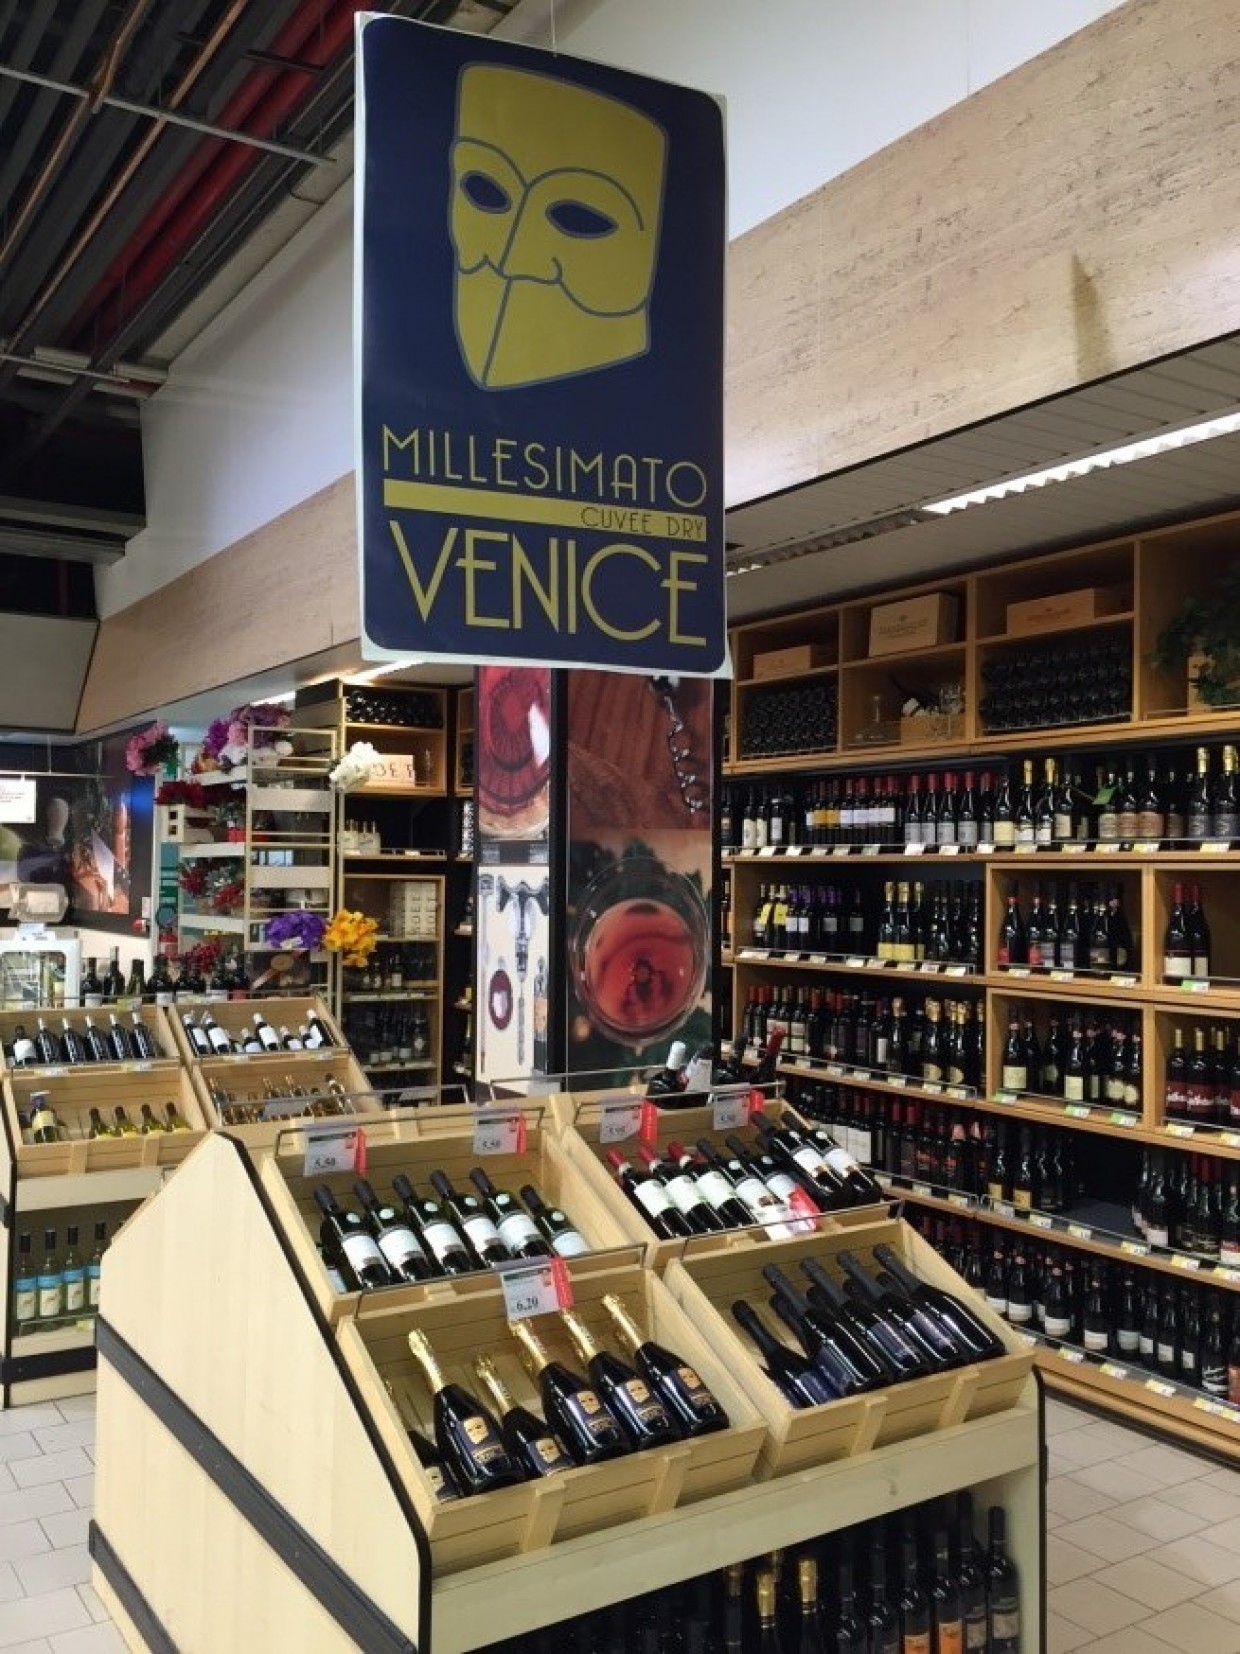 The cooperative Gelsi present Venice cuvée extradry